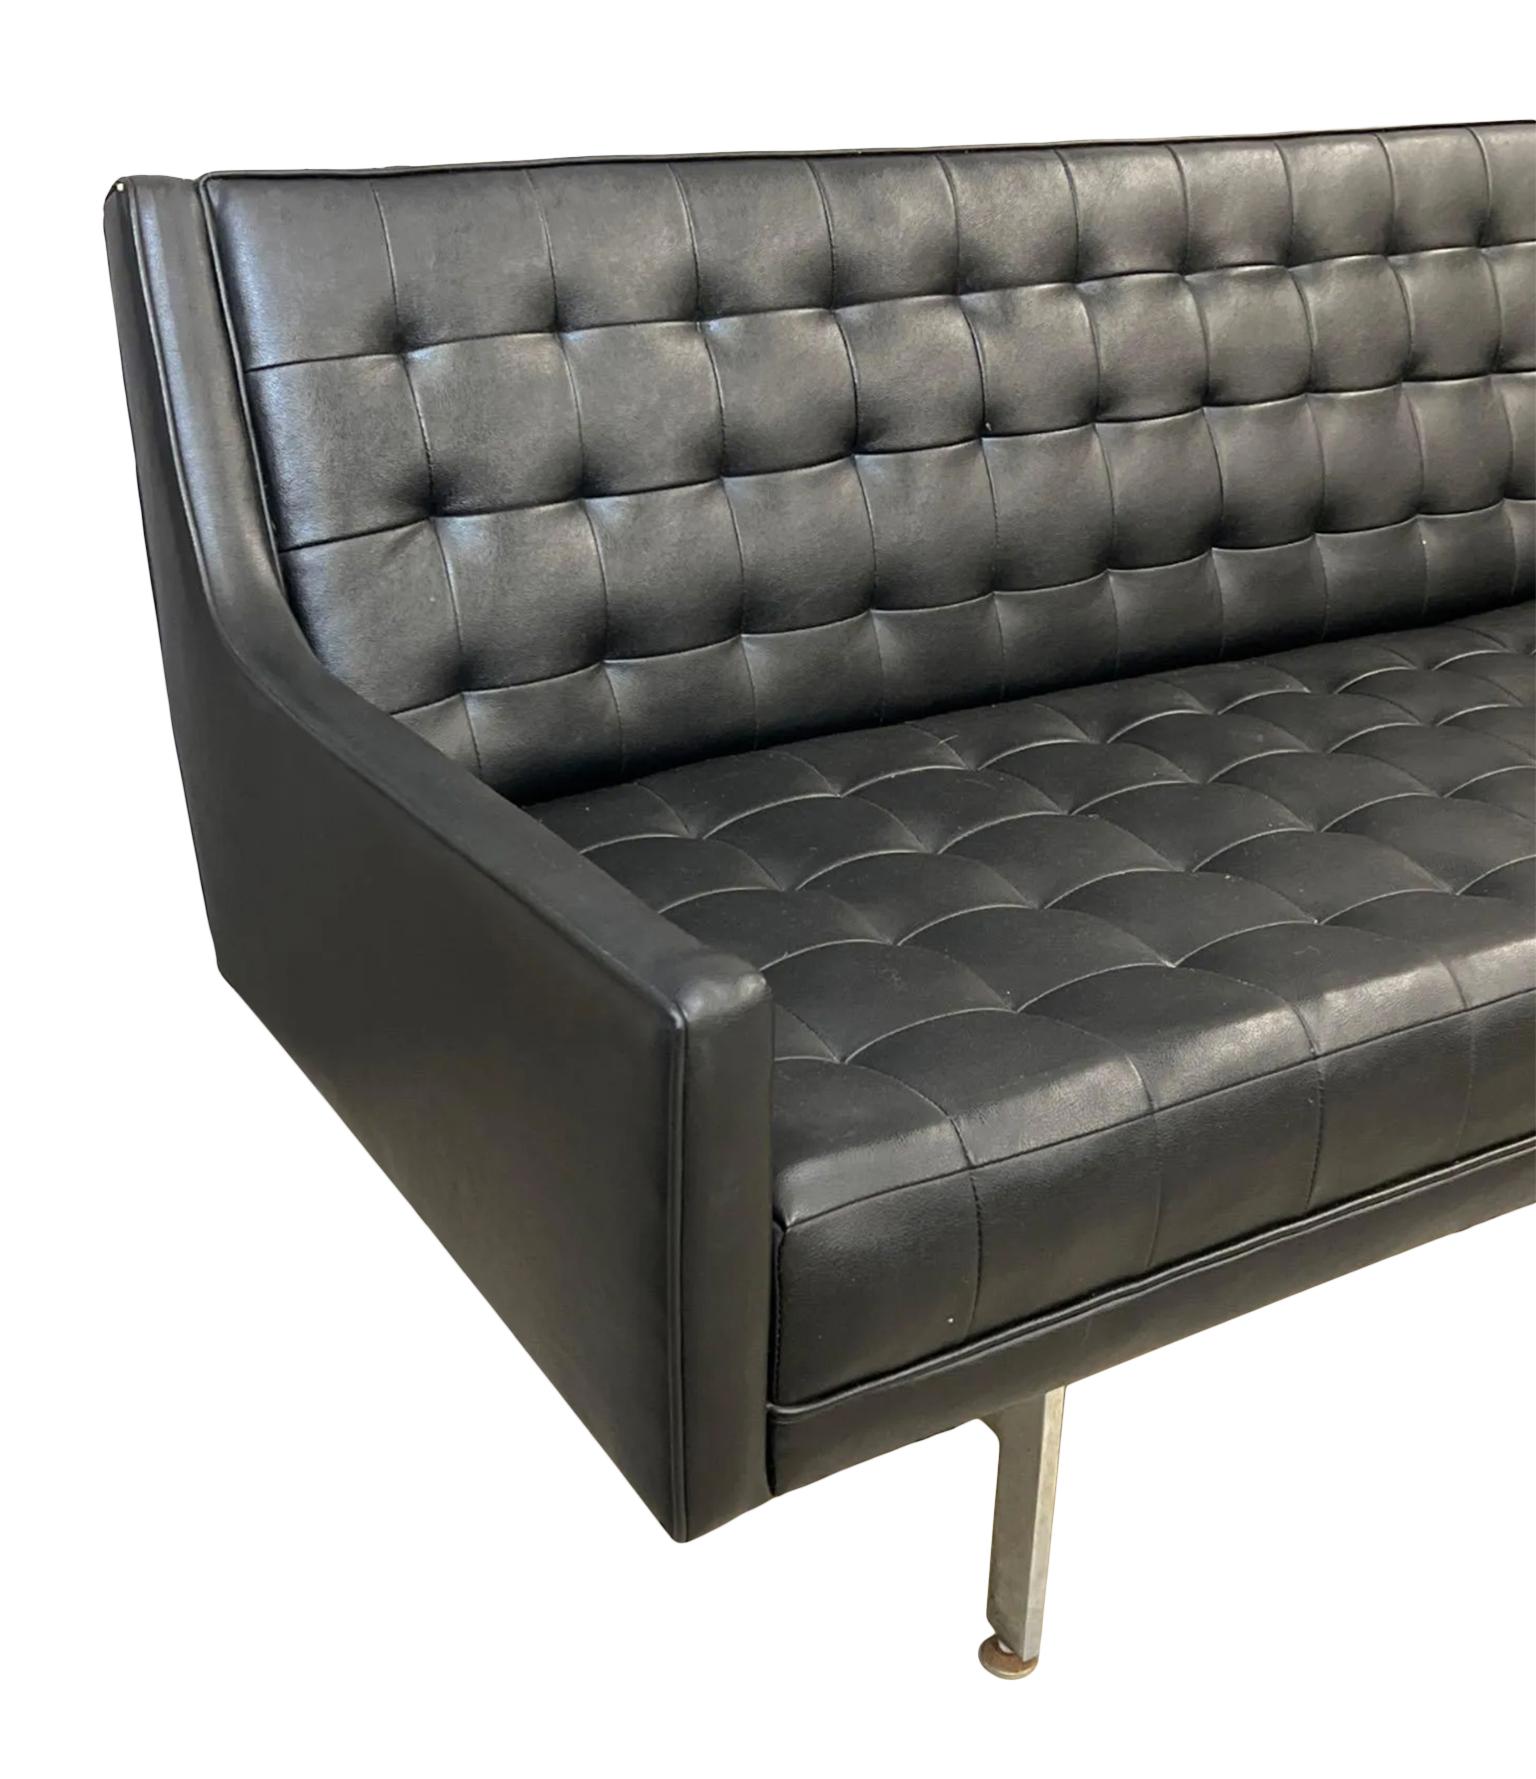 American Mid Century Black Faux Leather Vinyl Tufted Long Low Sofa by Patrician